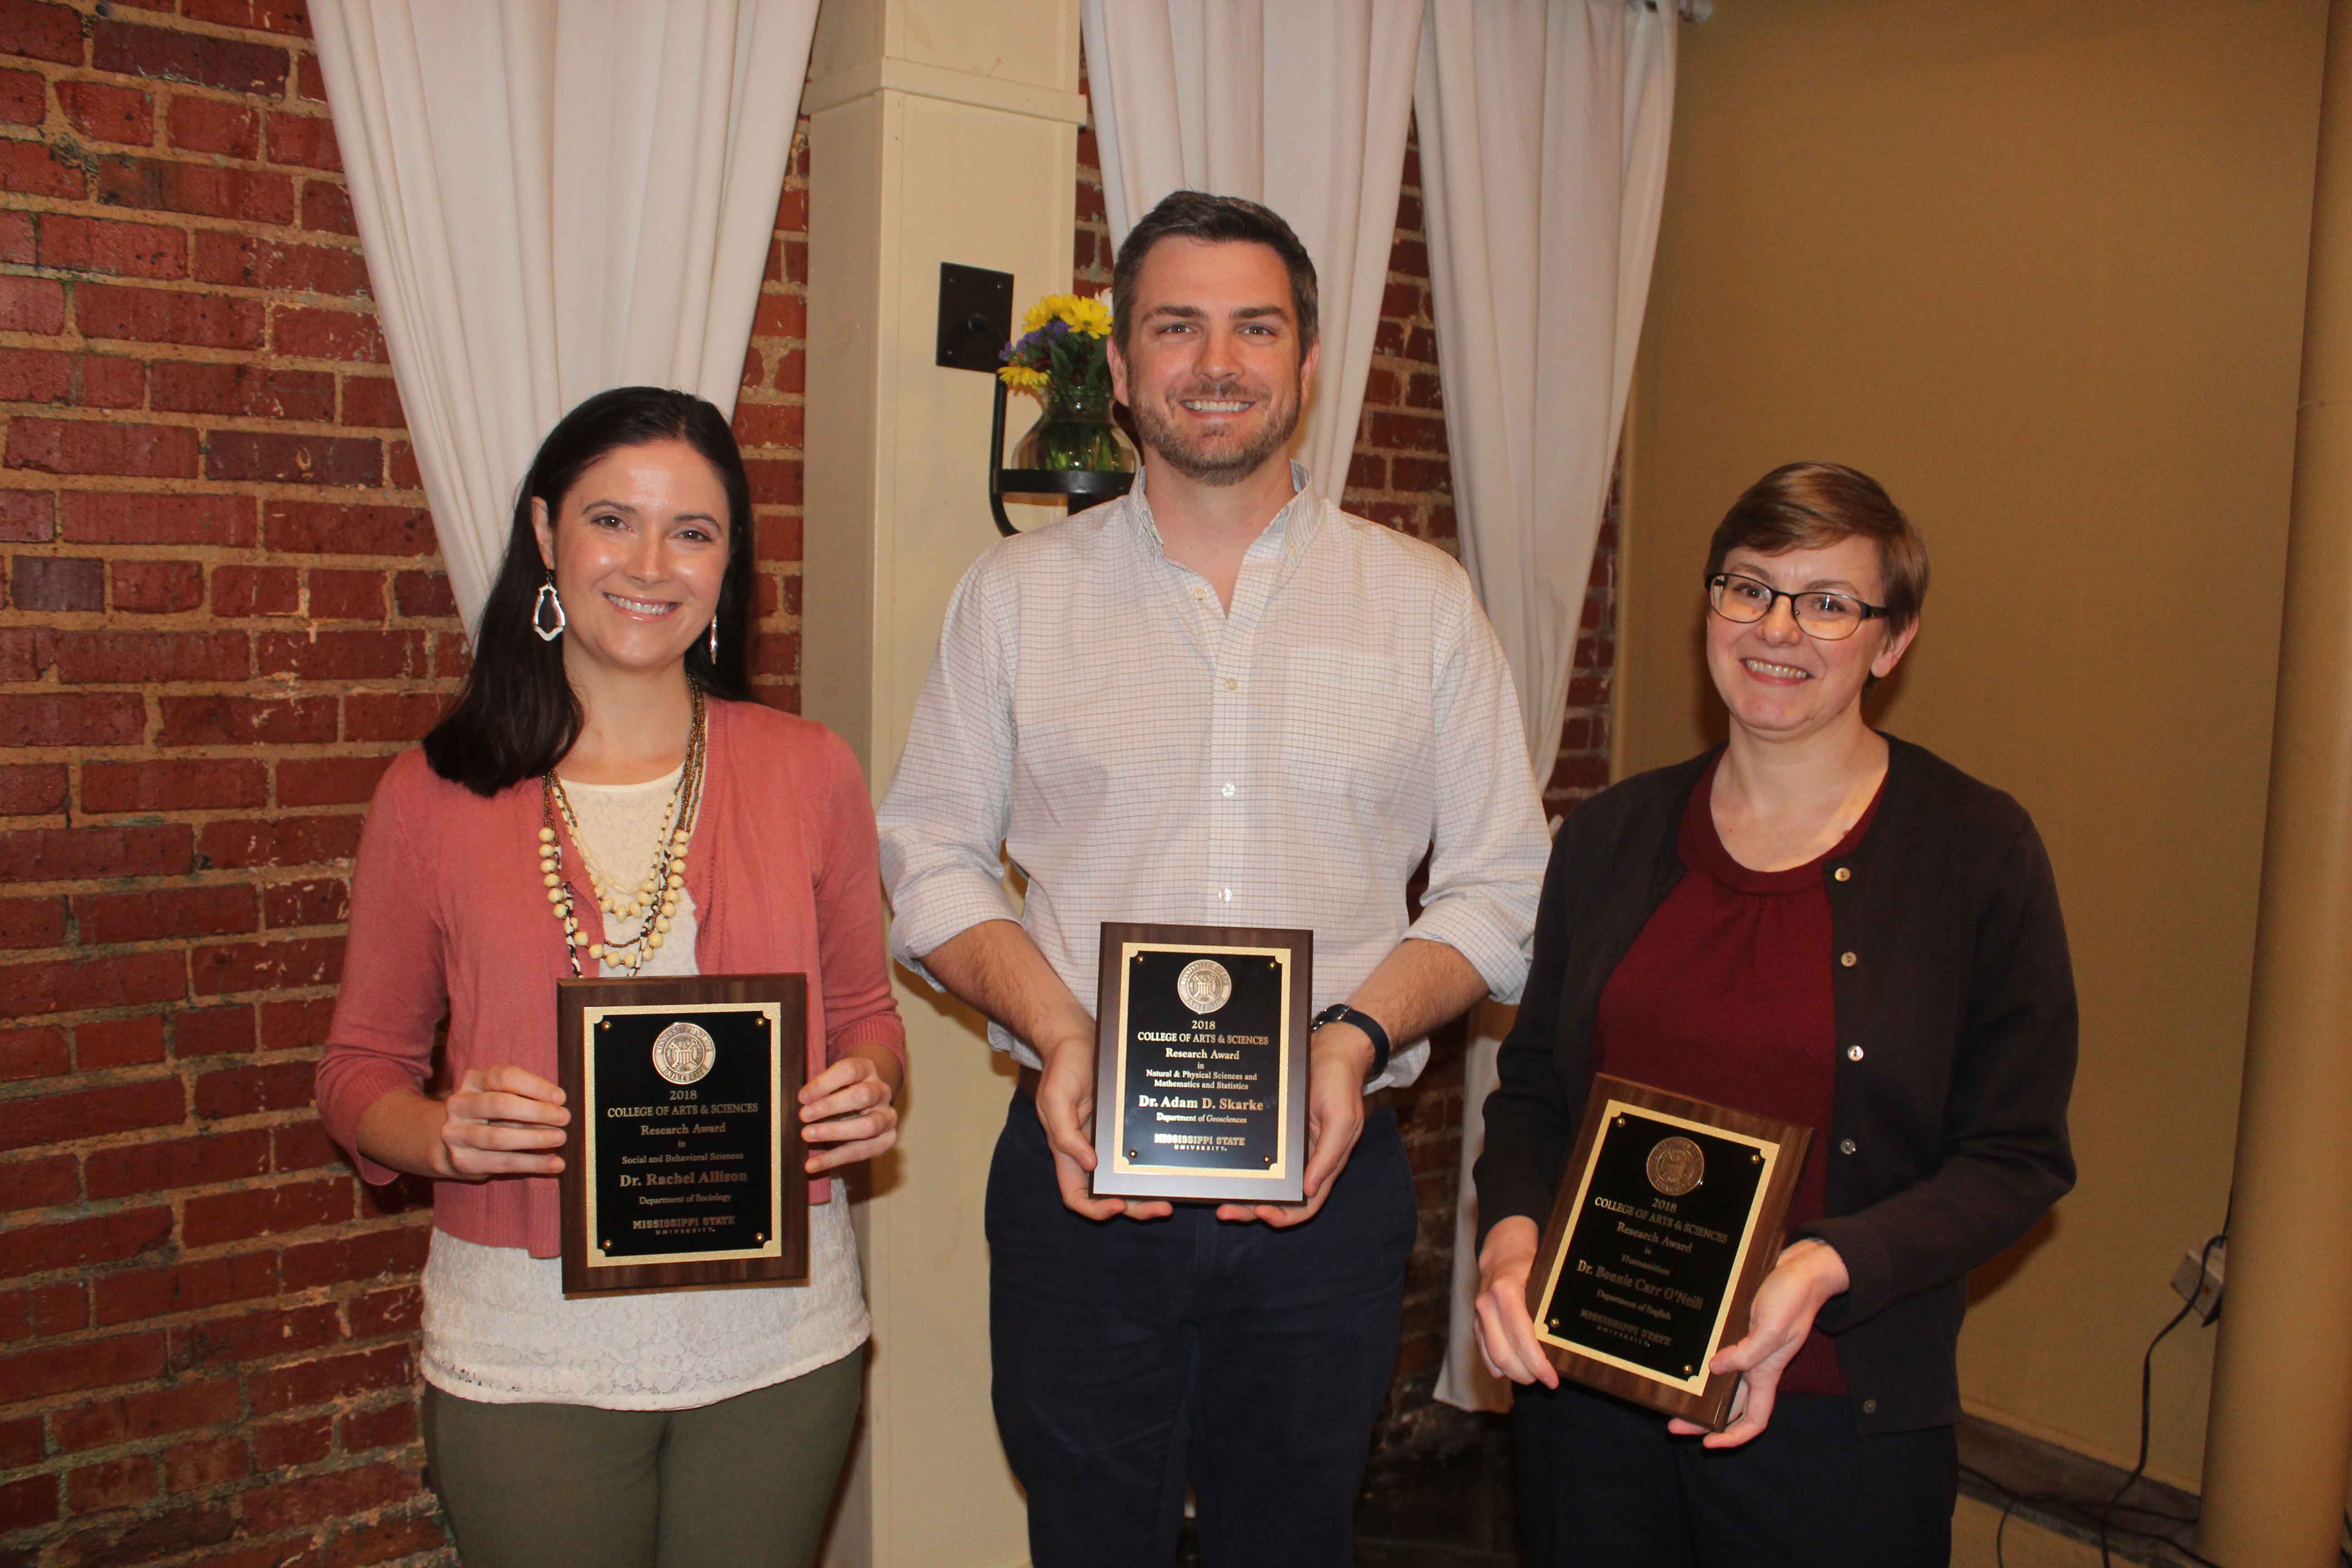 College of Arts & Sciences 2018 Research Award Recipients: Dr. Allison, Dr. Skarke (center), and Dr. O'Neill. 